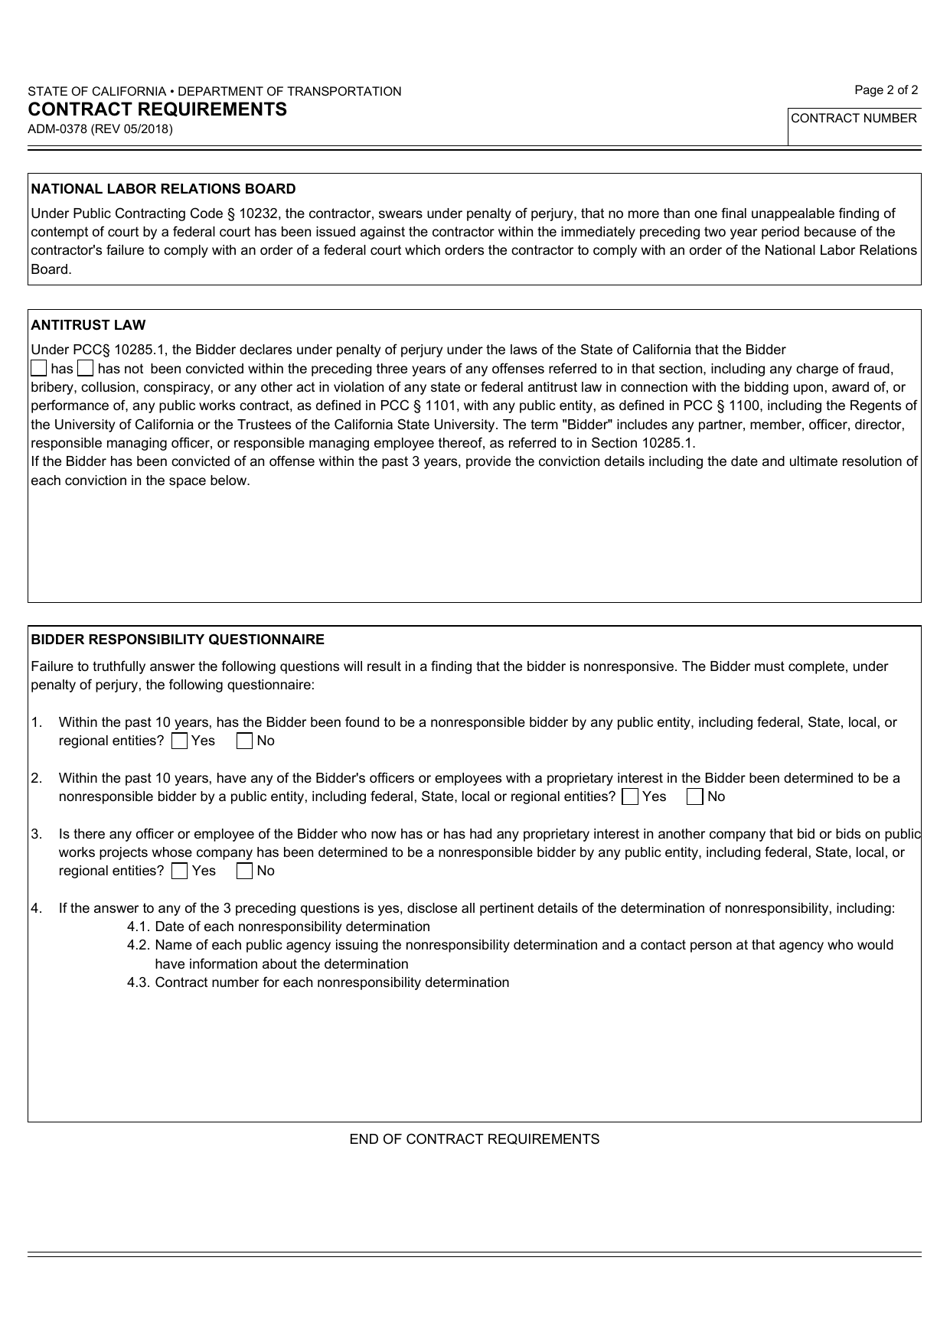 form-adm-0378-download-fillable-pdf-or-fill-online-contract